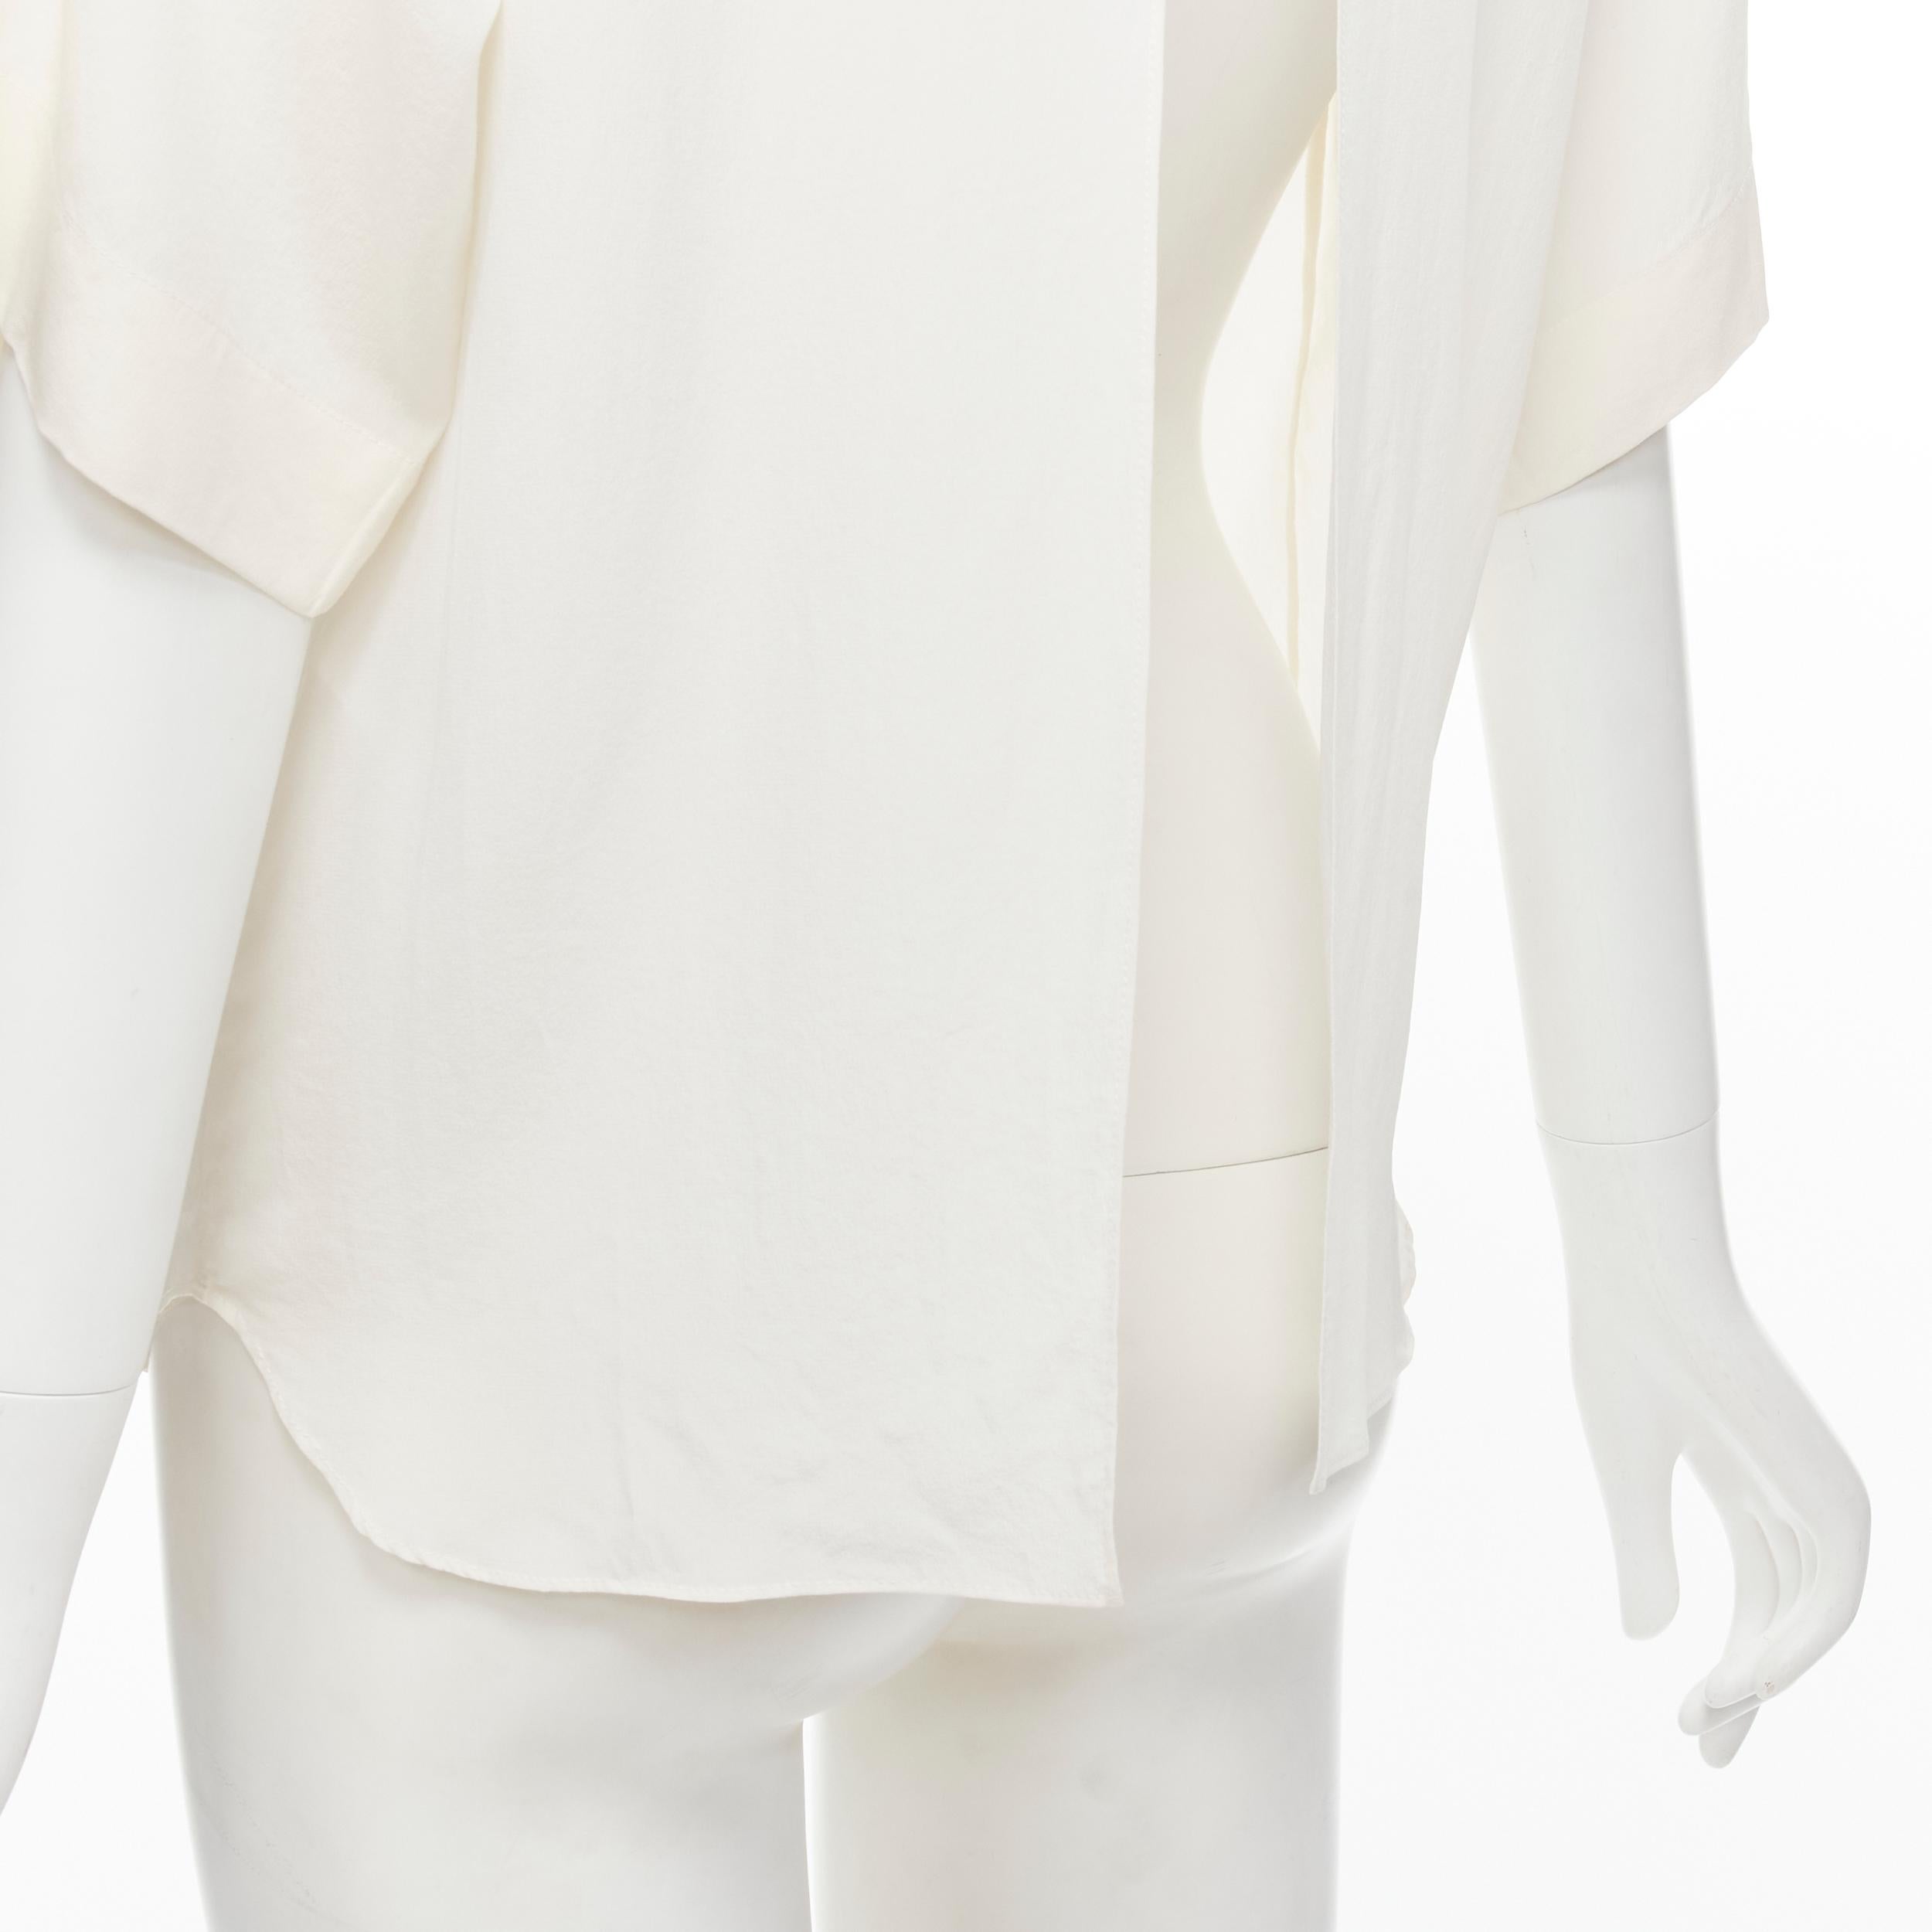 CHLOE 100% silk milk white split open back short sleeve top FR34 XS 
Reference: LNKO/A01876 
Brand: Chloe 
Material: Silk 
Color: White 
Pattern: Solid 
Closure: Hook & Eye 
Extra Detail: Single hook & eye closure at back of neck. 
Made in: